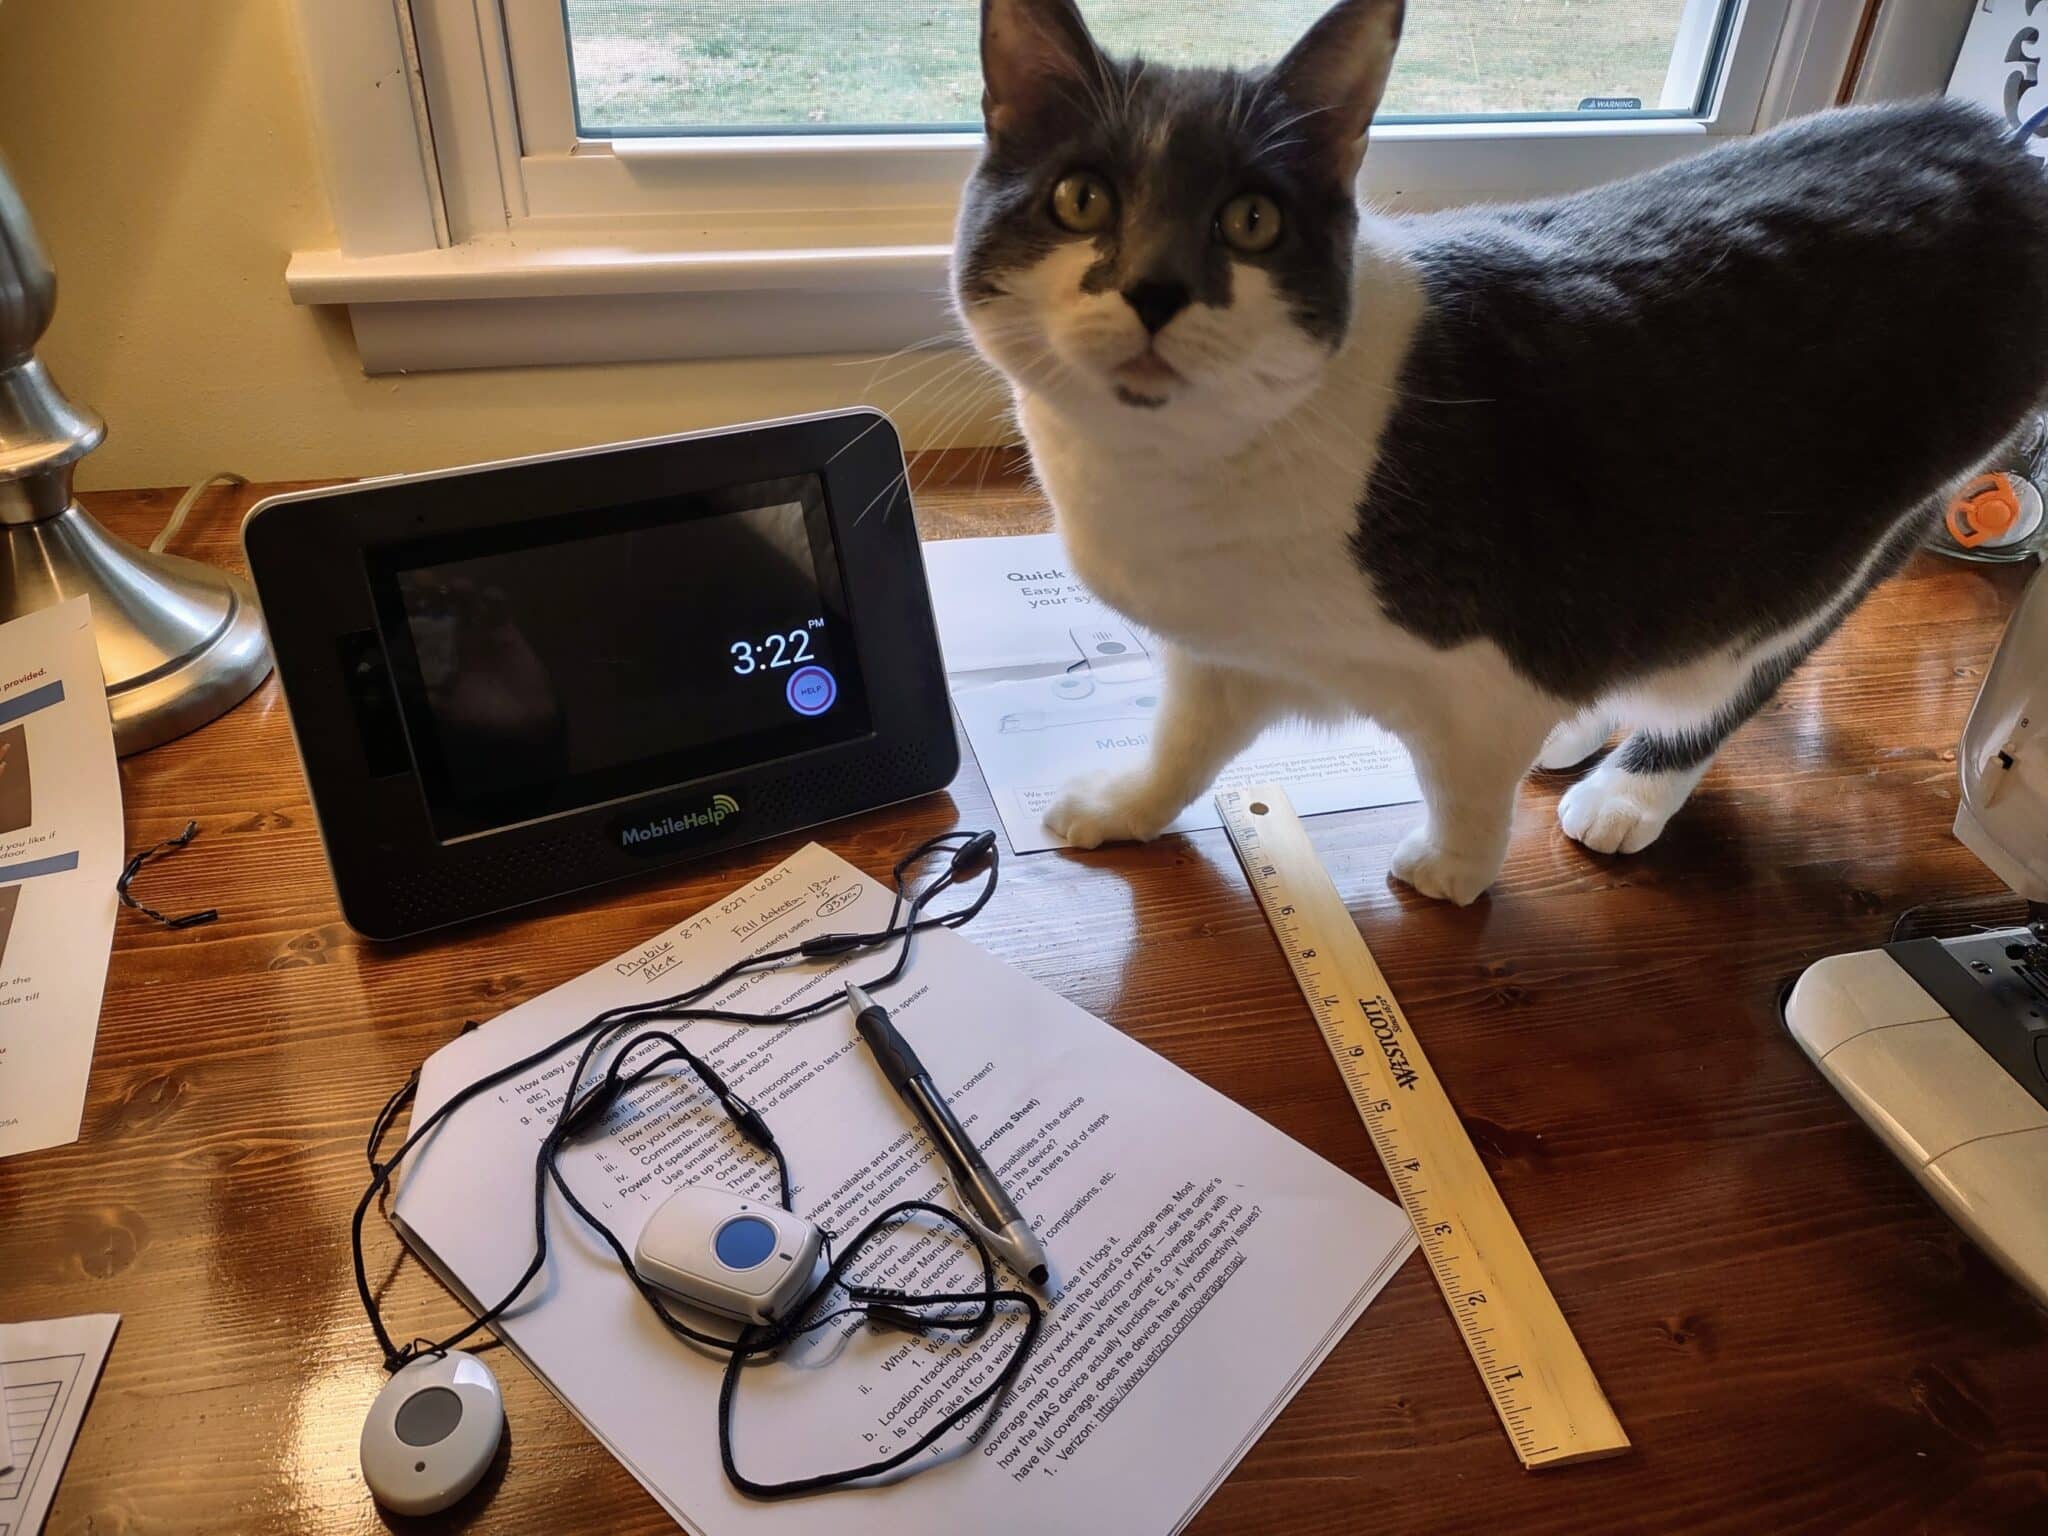 Gray and white cat next to medical alert system, ruler, and medical alert necklaces during testing.